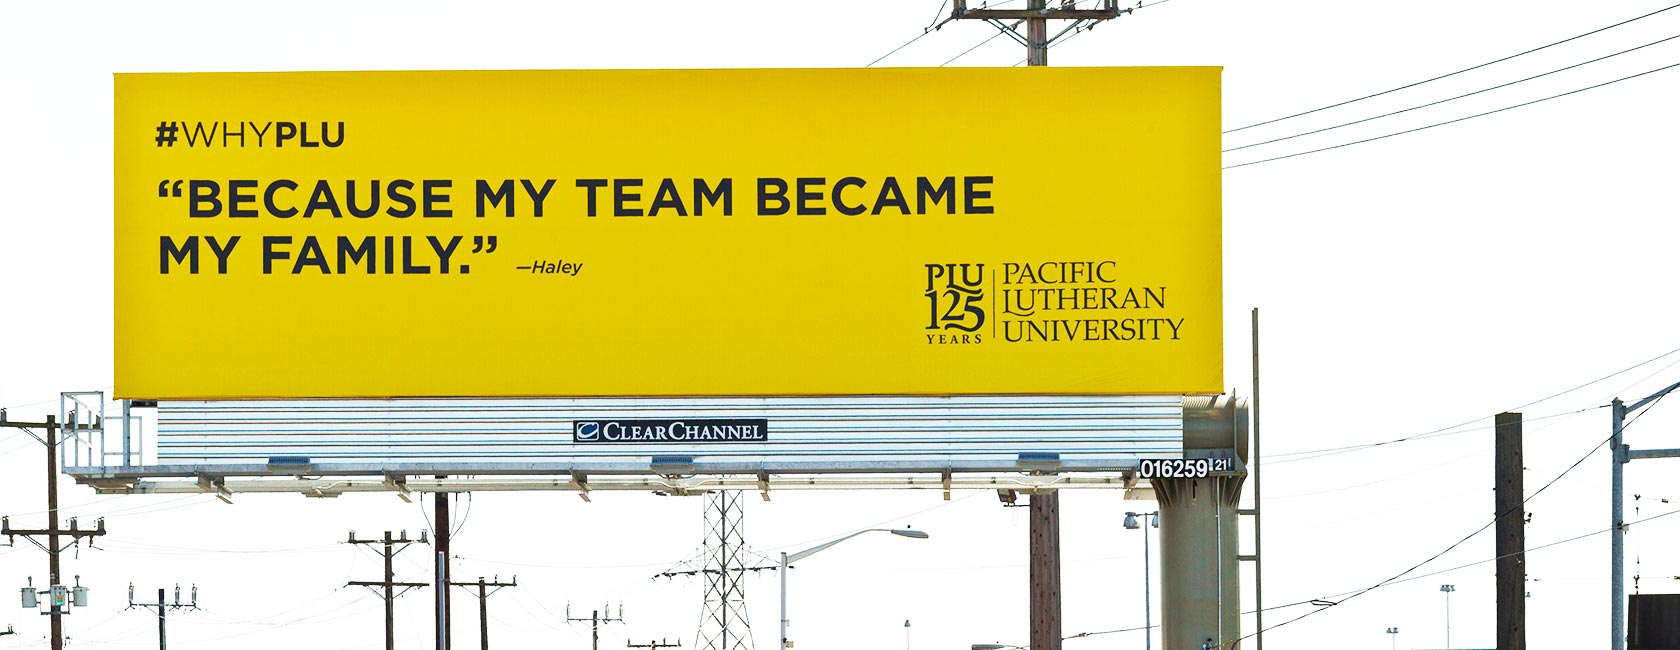 “Because My Team Became My Family” is one of two #whyPLU billboards in Seattle’s “sports zone”—this one at First Avenue and East Marginal Way. (Photo: John Froschauer/PLU)